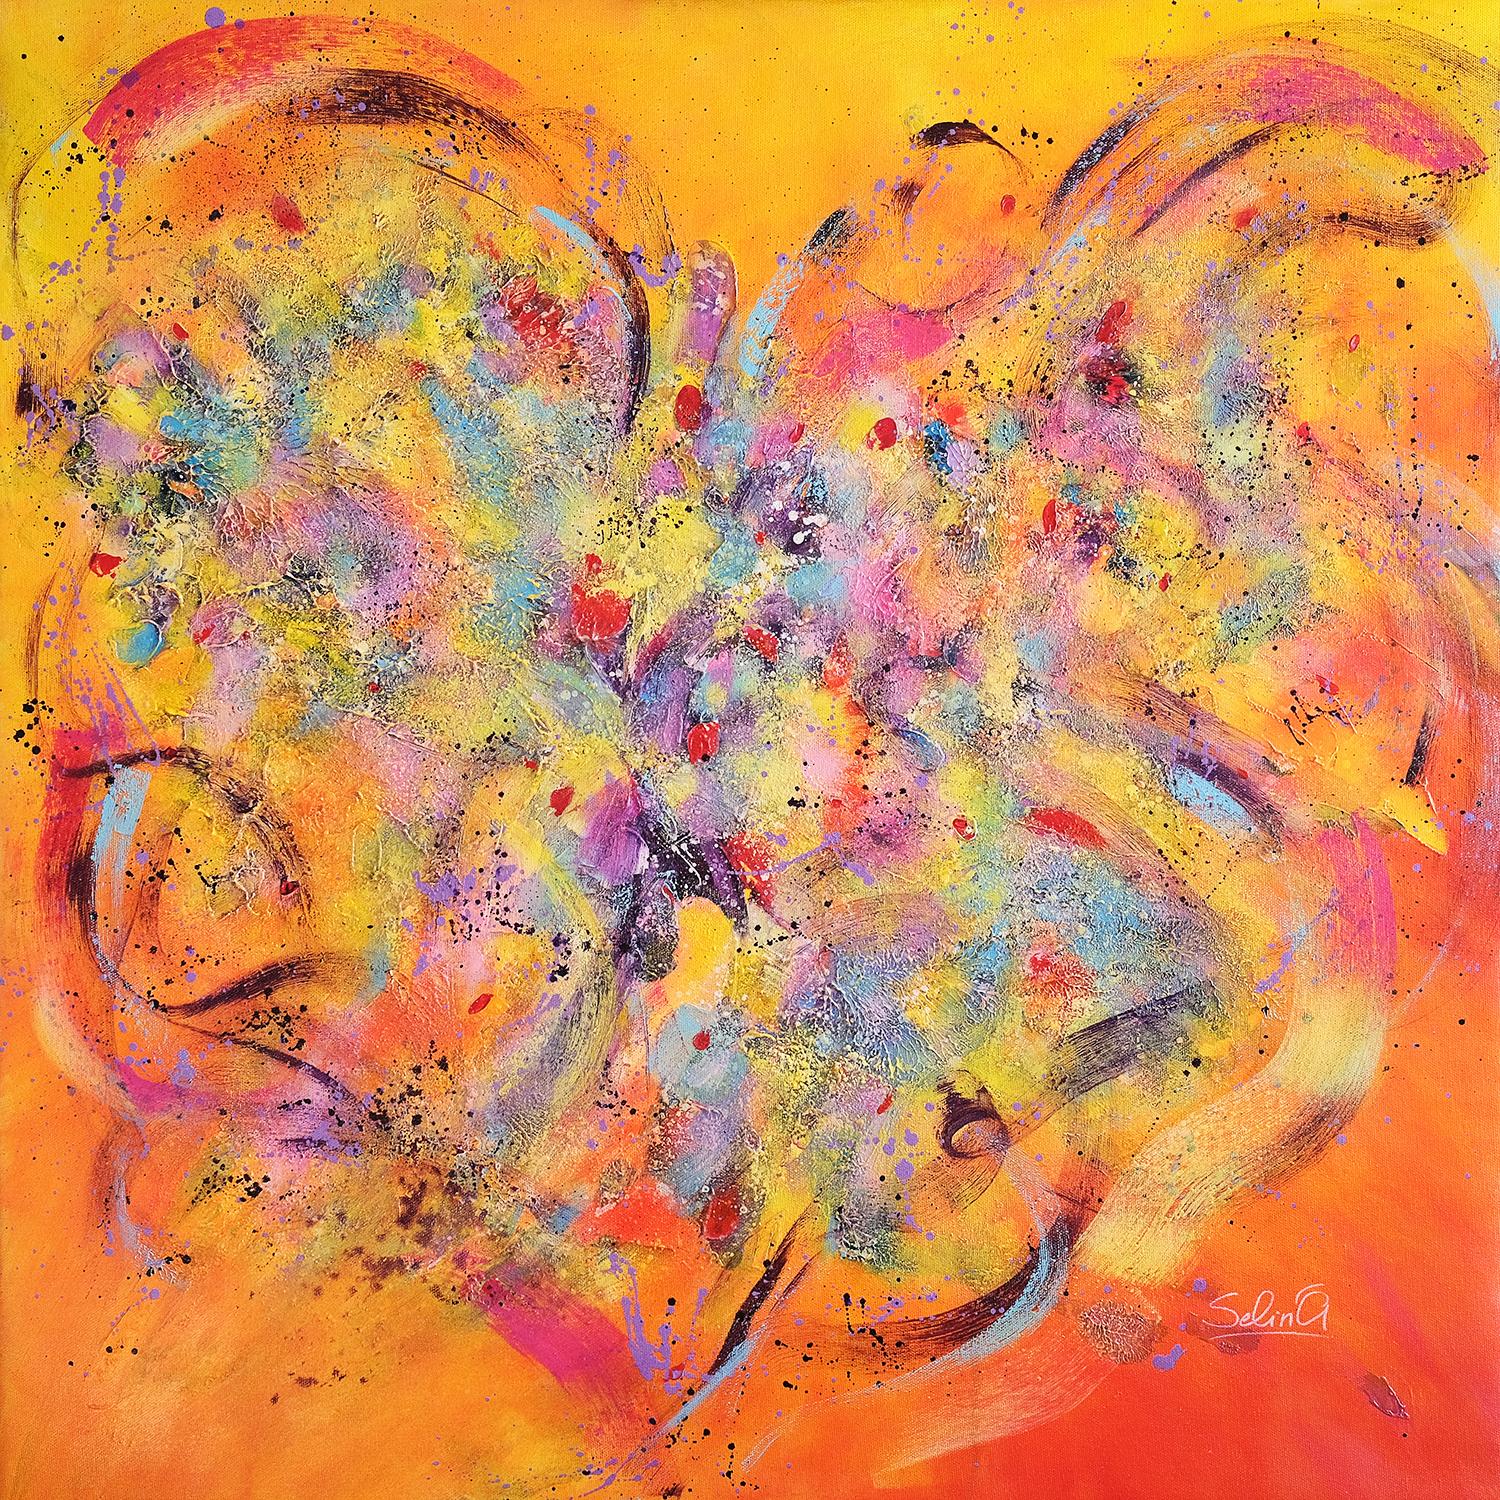 Love, Modern Colorful Abstract Painting 100x100cm by Anna Selina